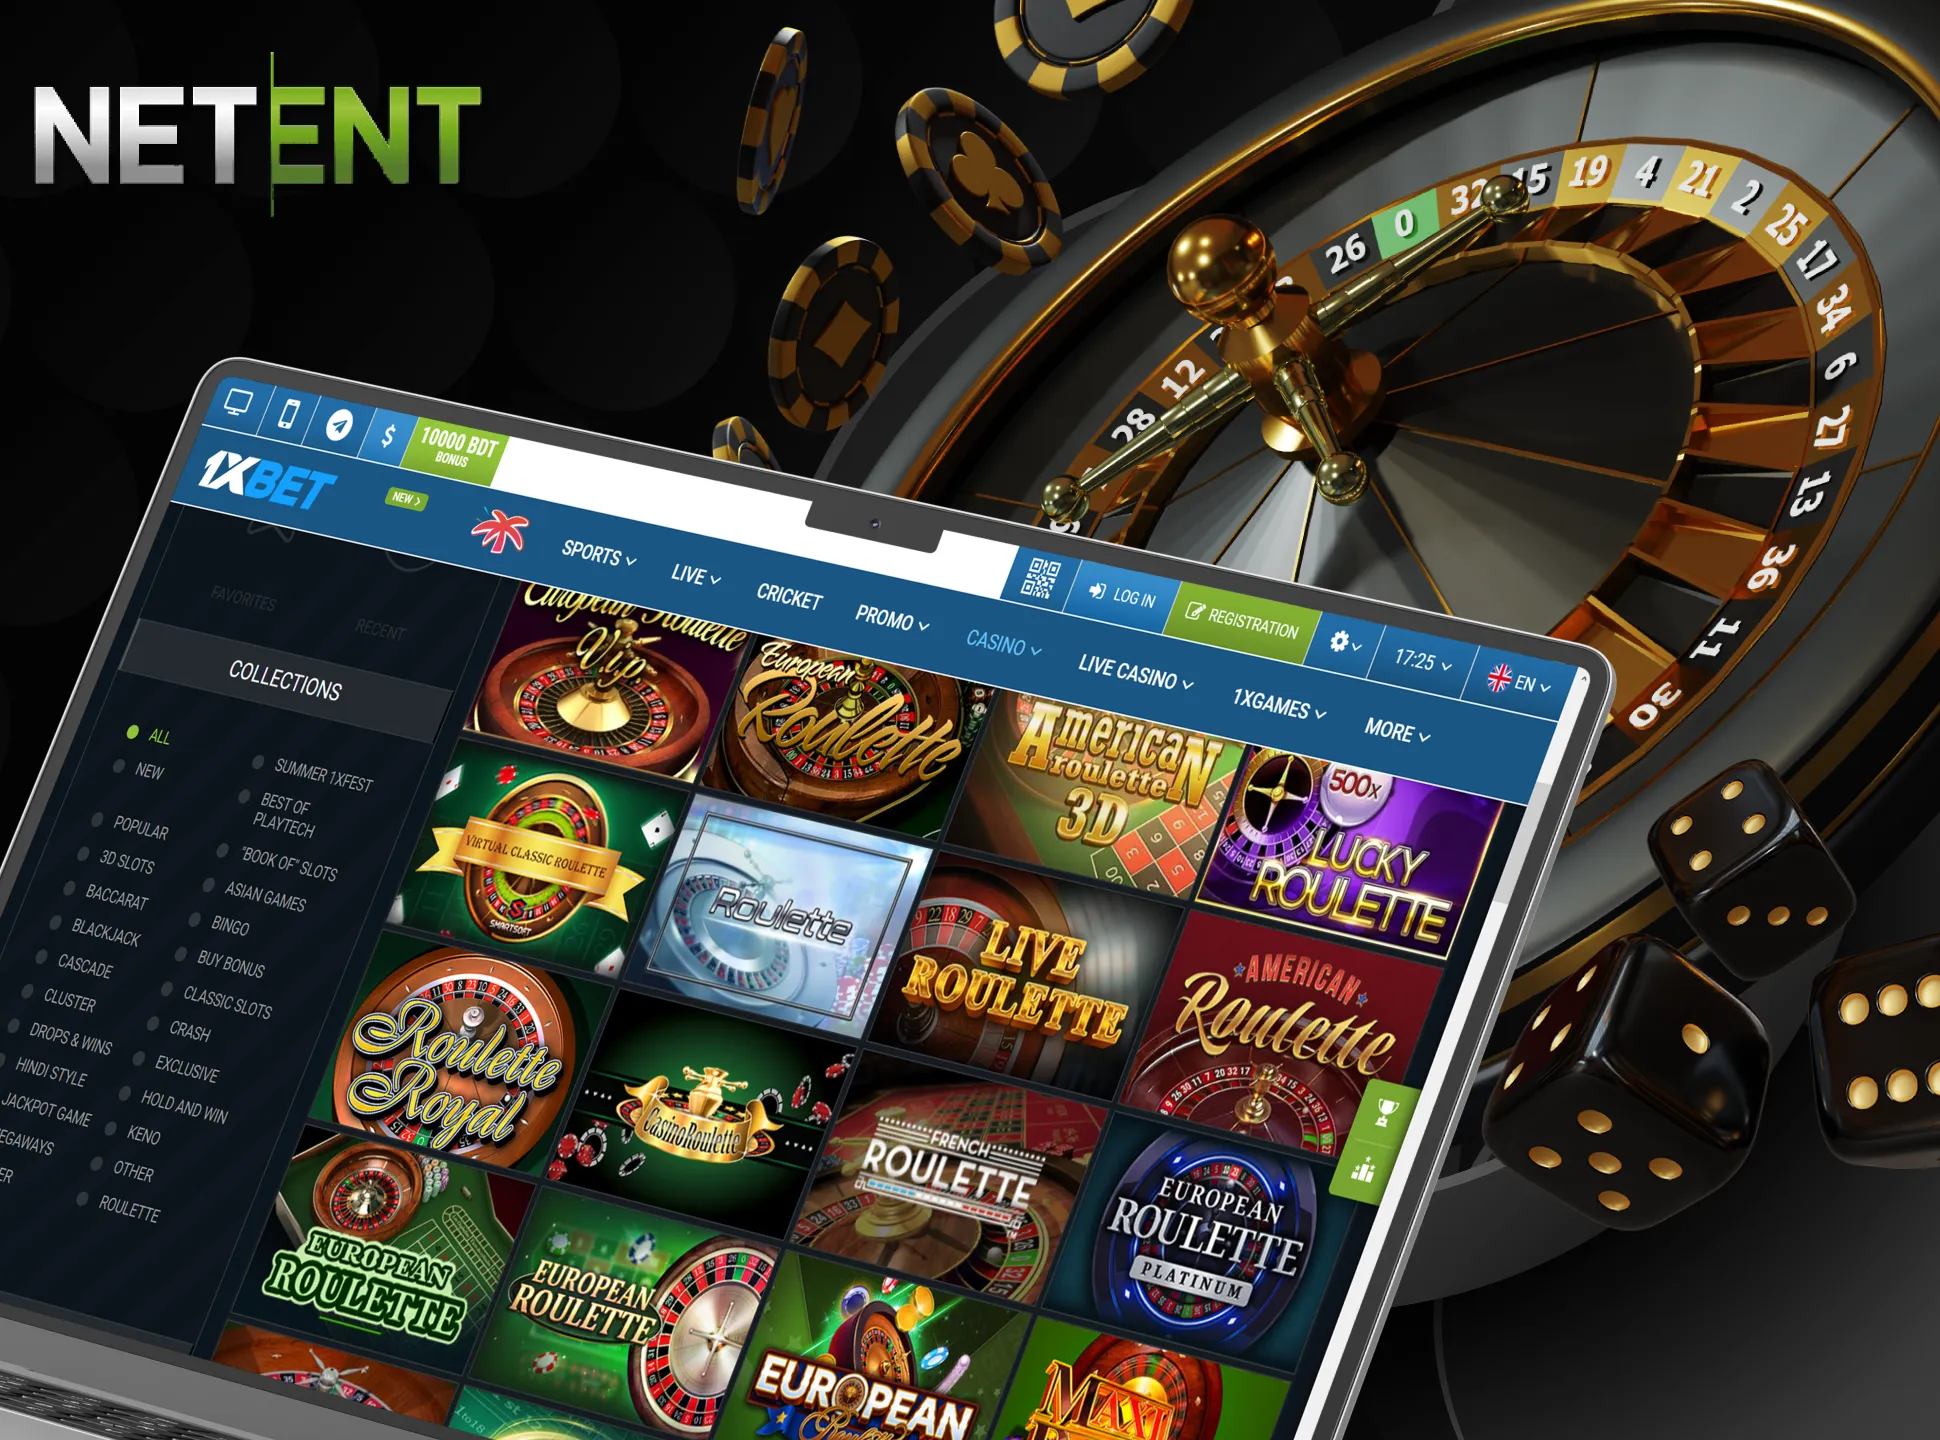 You will find various types of roulette from NetEnt.